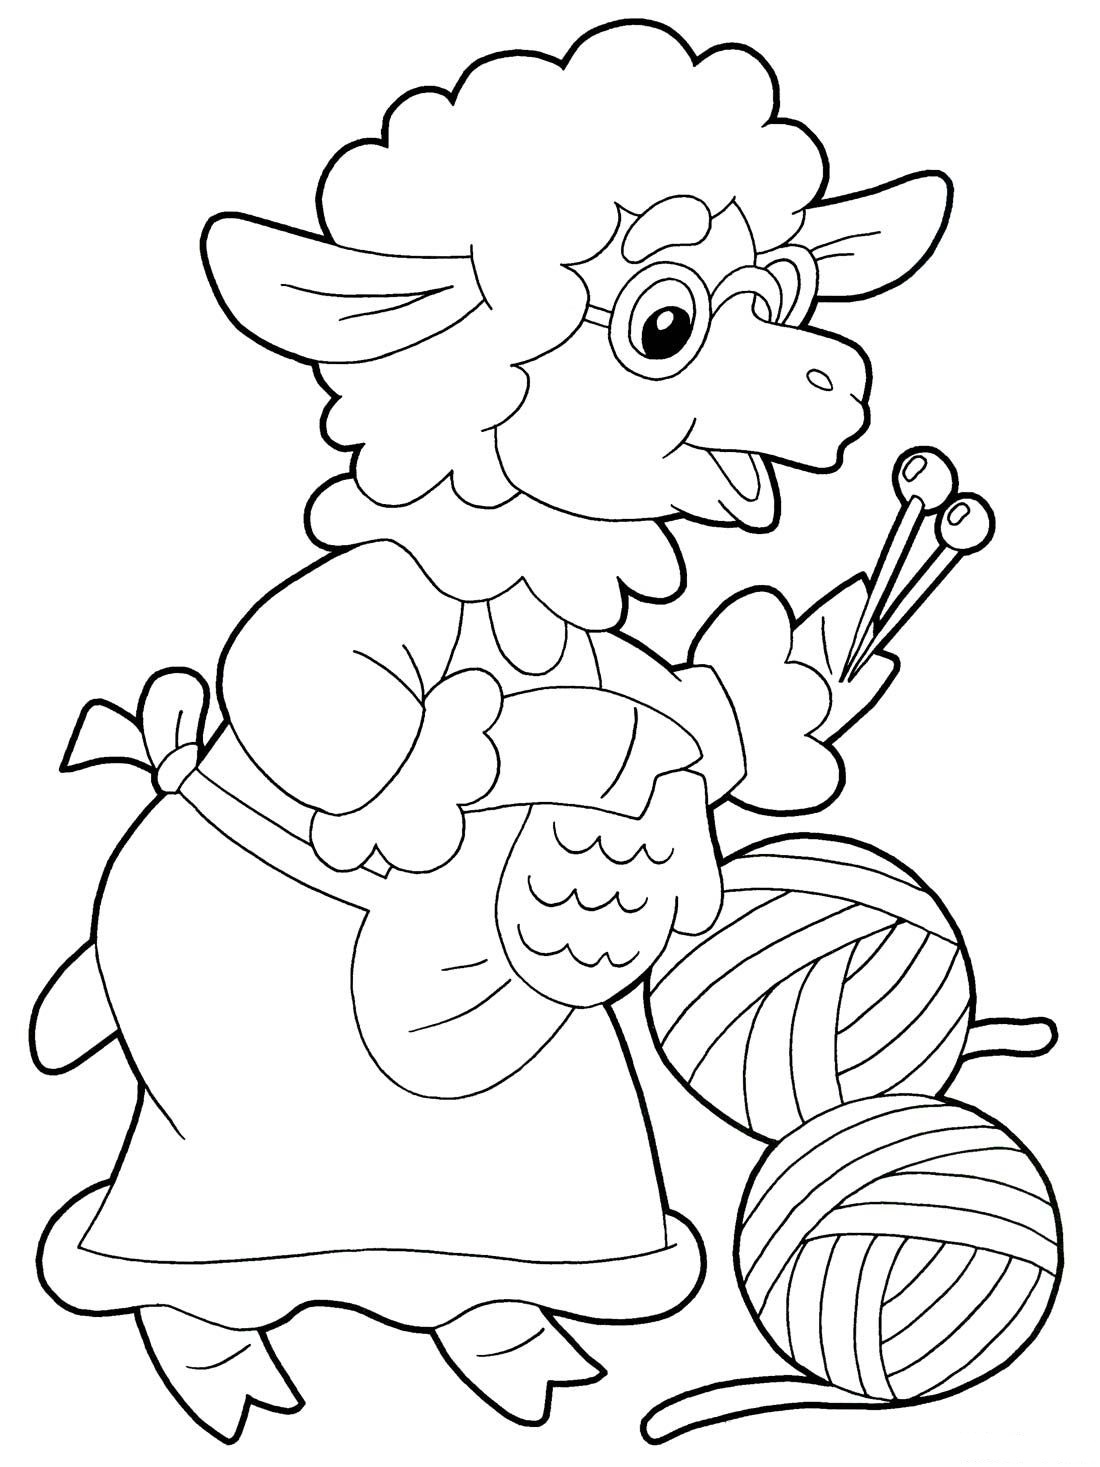 sheep coloring pages to print, year of sheep 2015